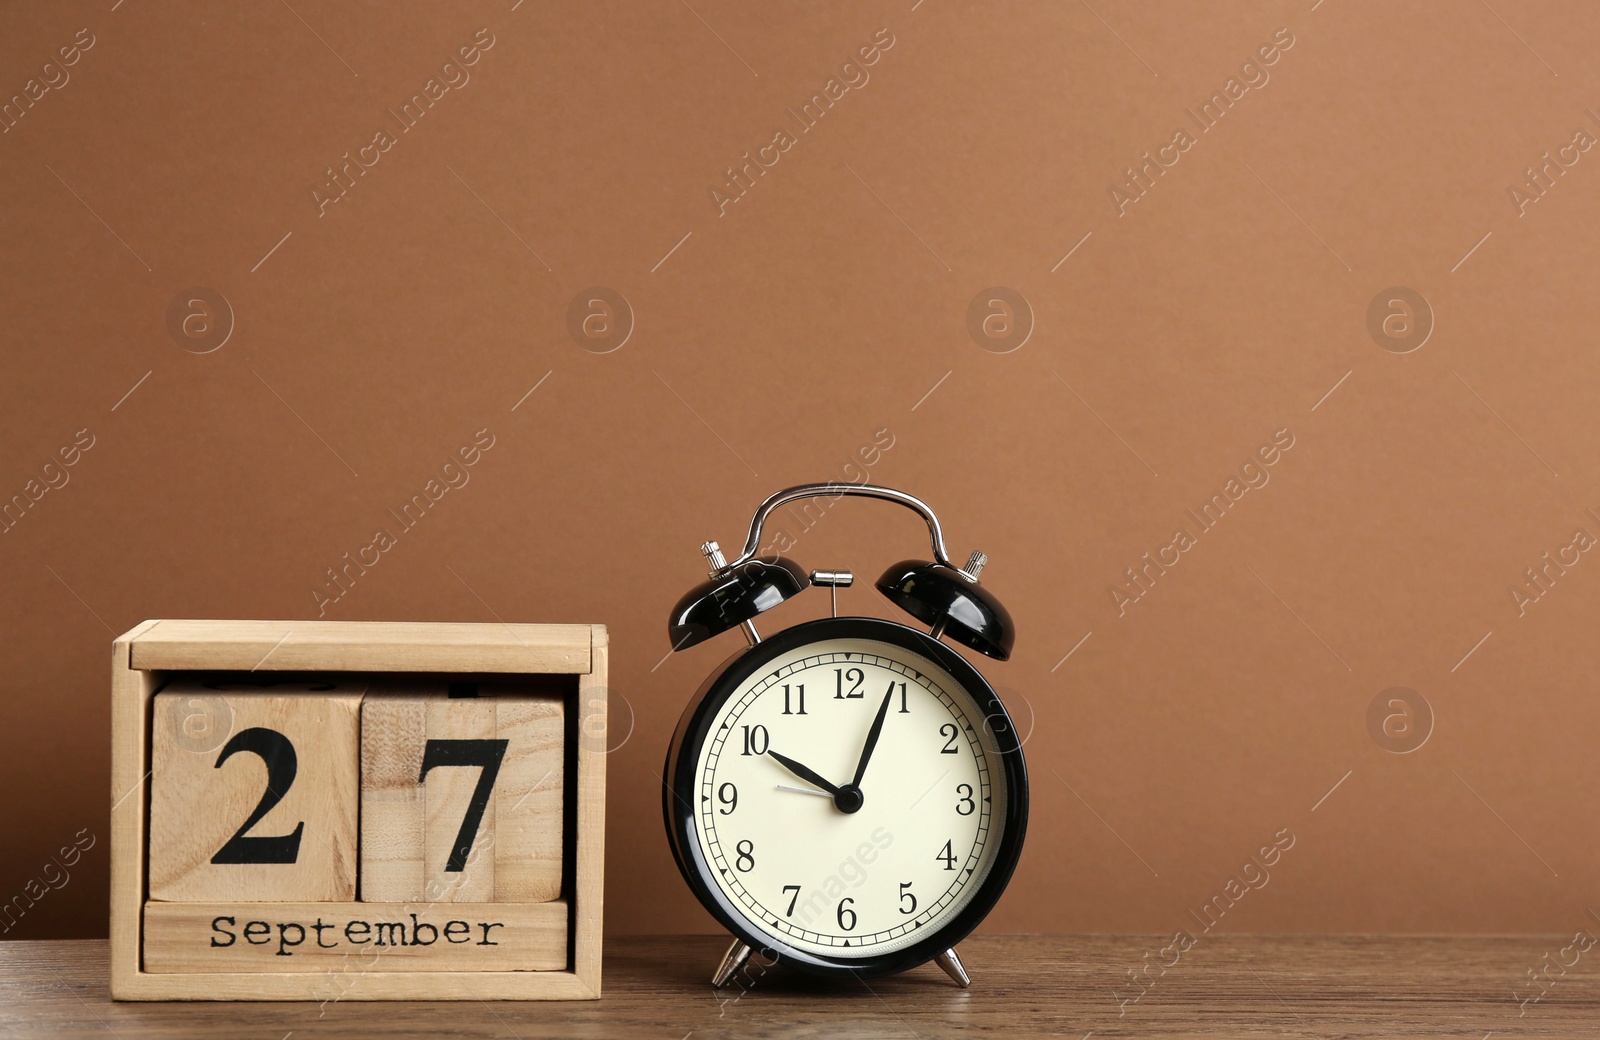 Photo of Wooden block calendar and alarm clock on table against brown background